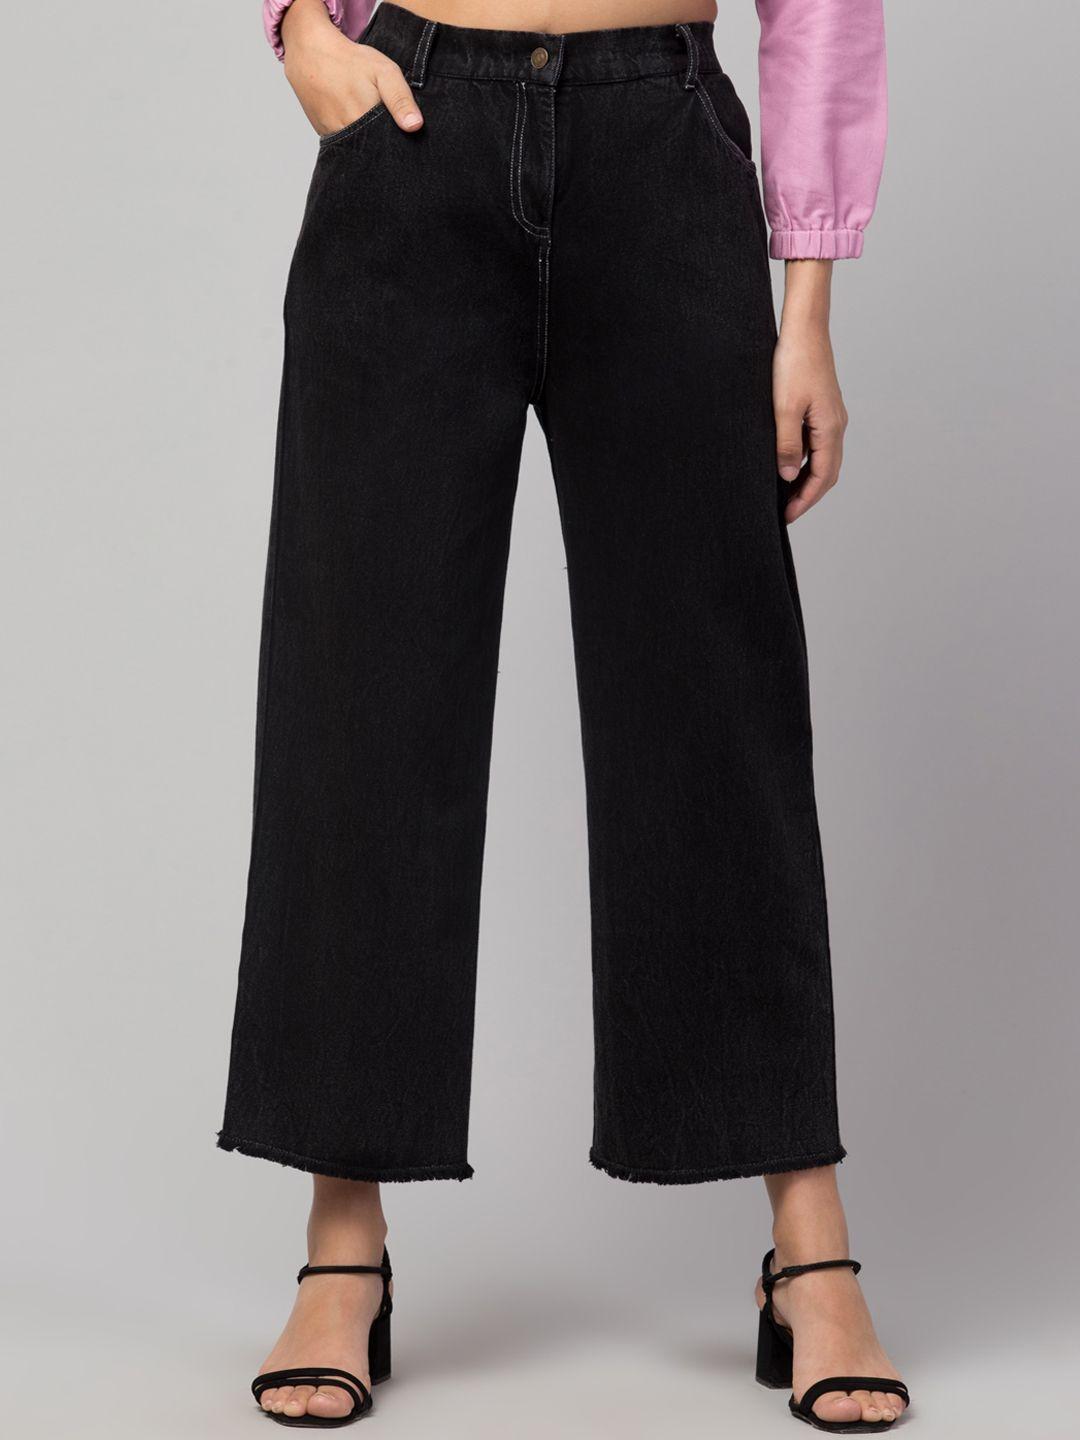 orchid hues women black flared high-rise jeans